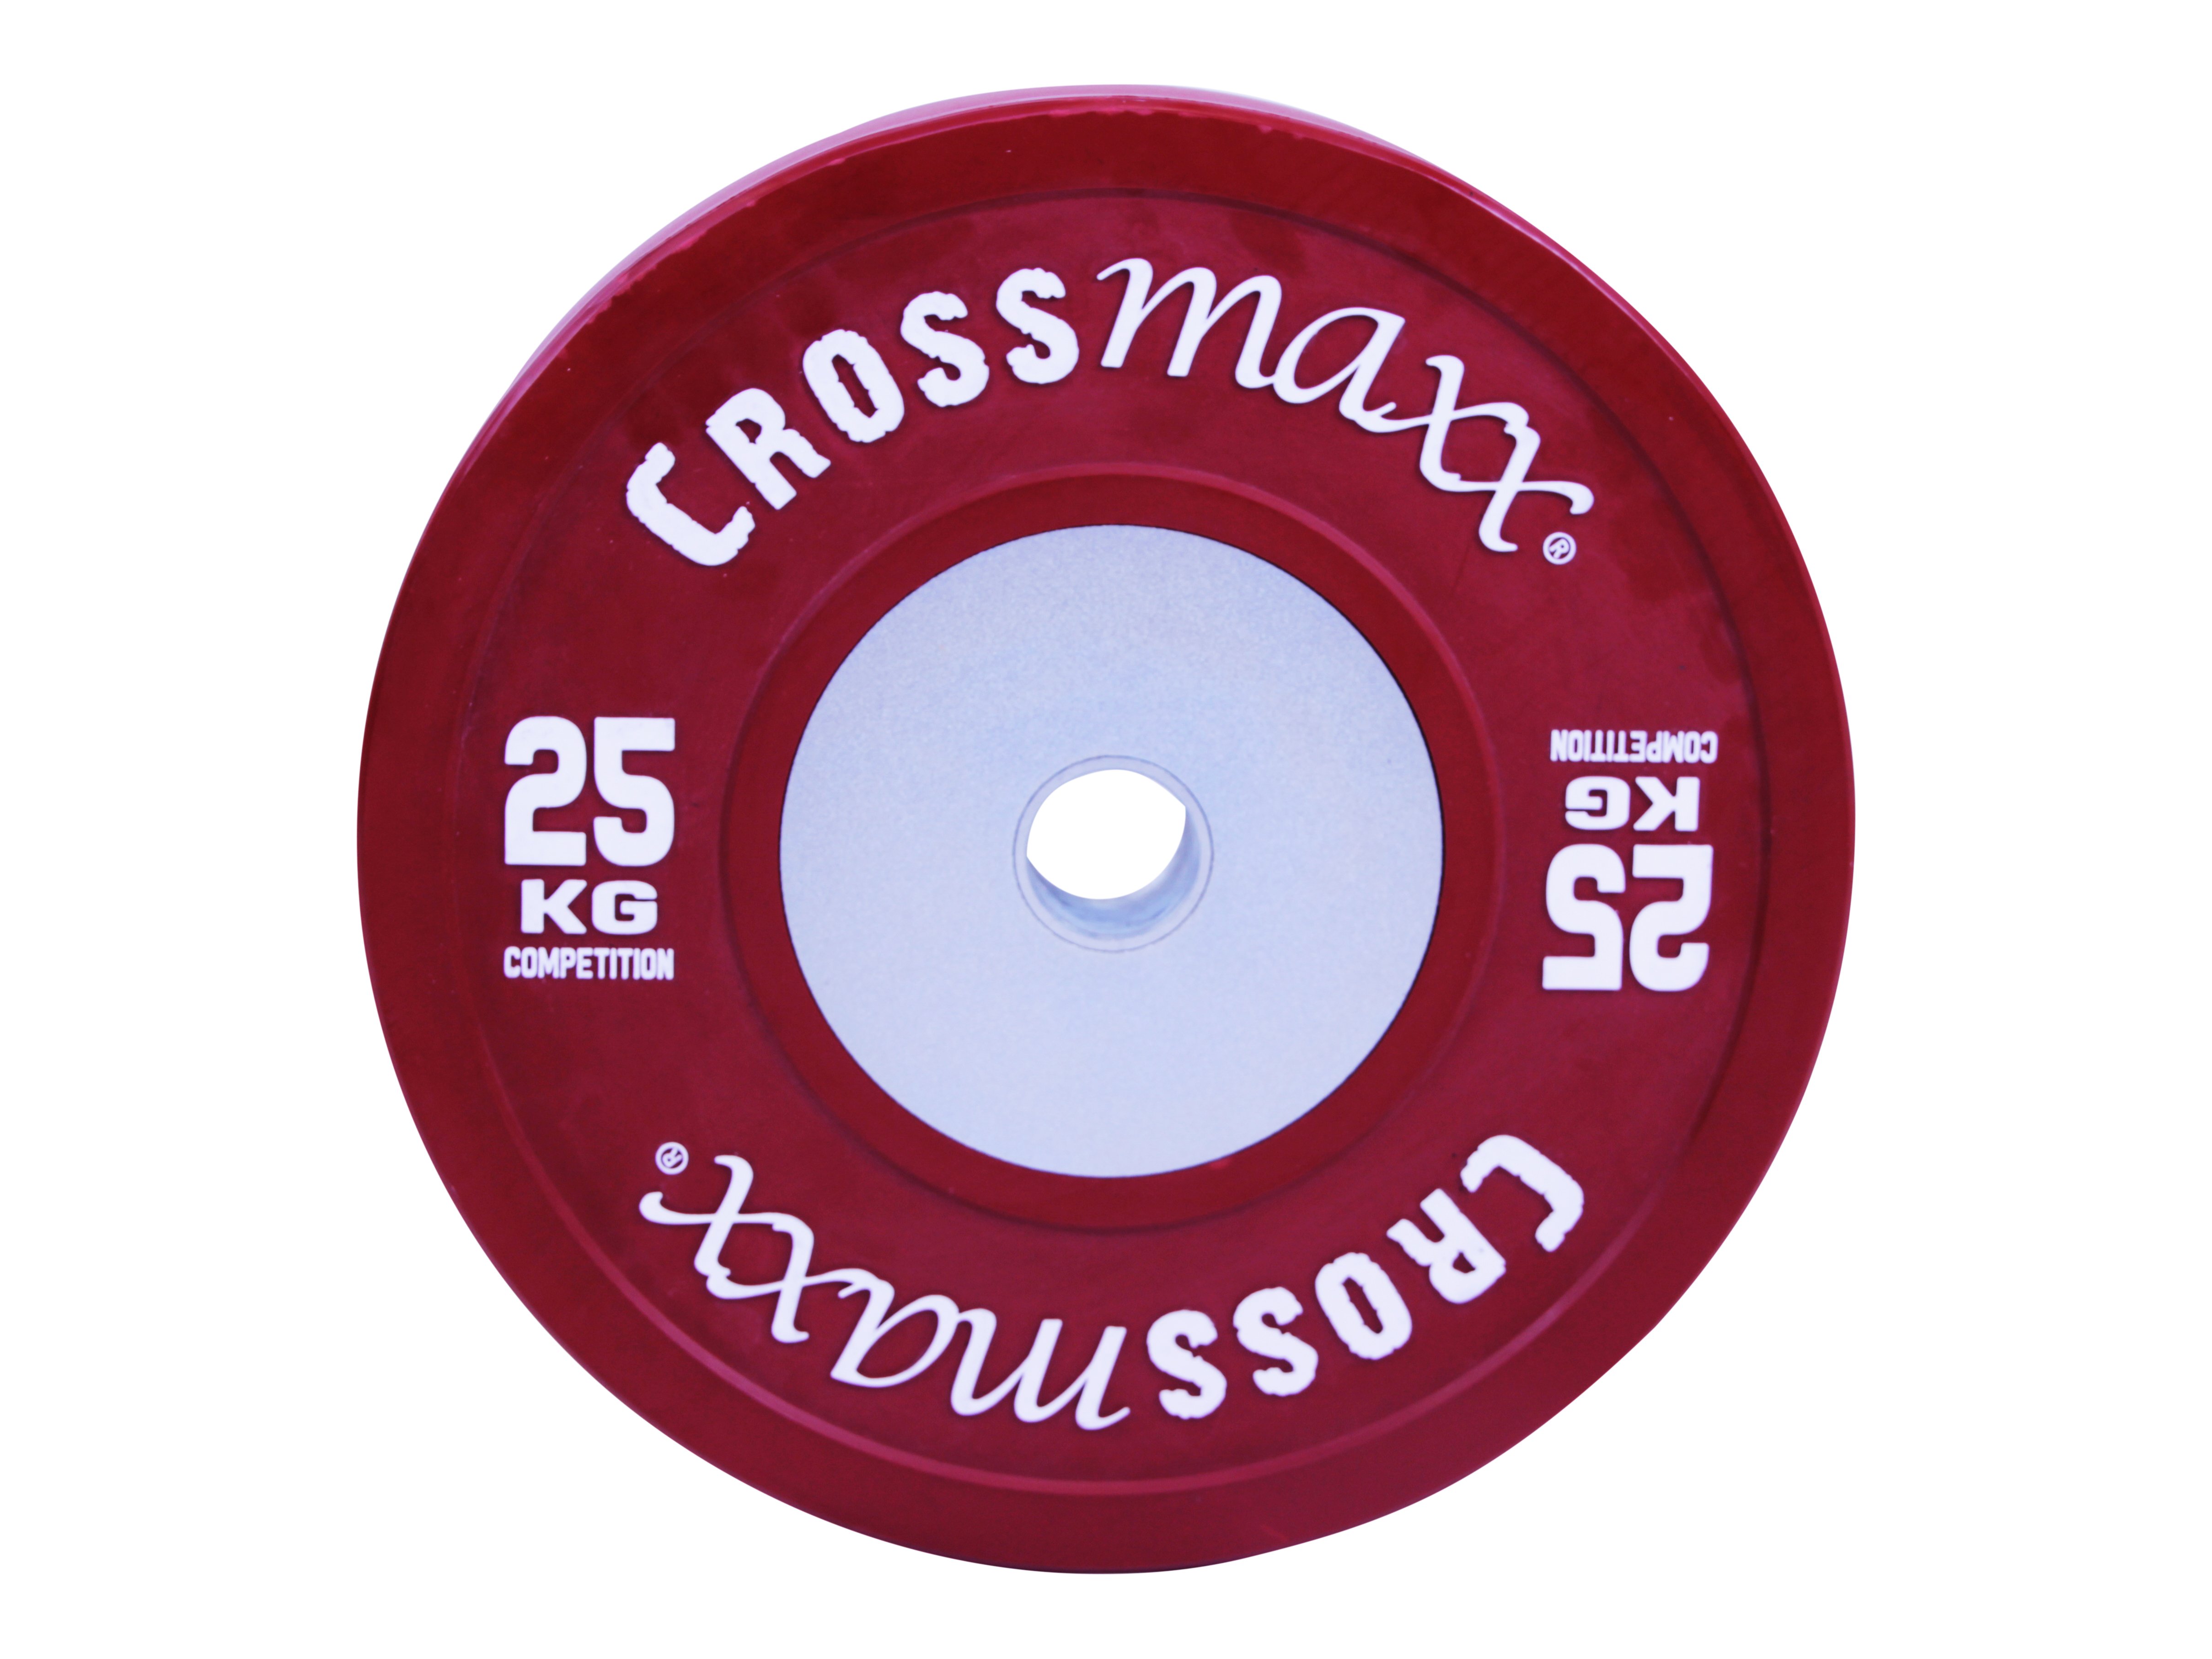 Crossmaxx Competition Bumper Plate 25 kg Red - Demo